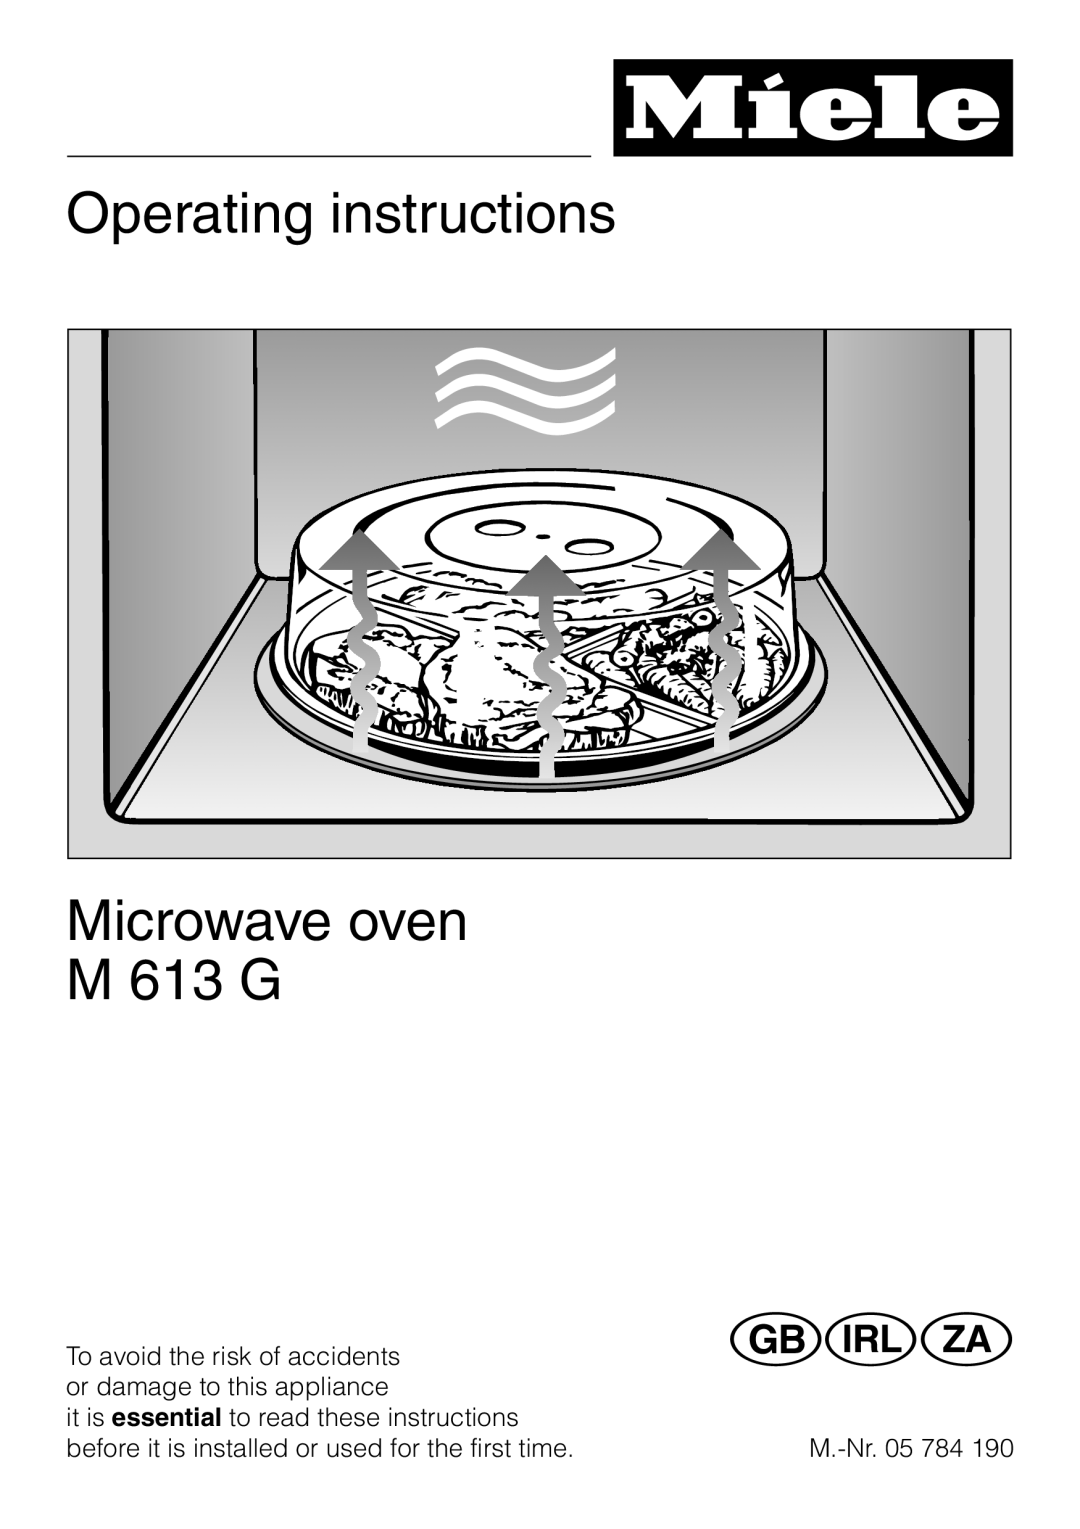 Miele M 613 G manual Operating instructions, Microwave oven 